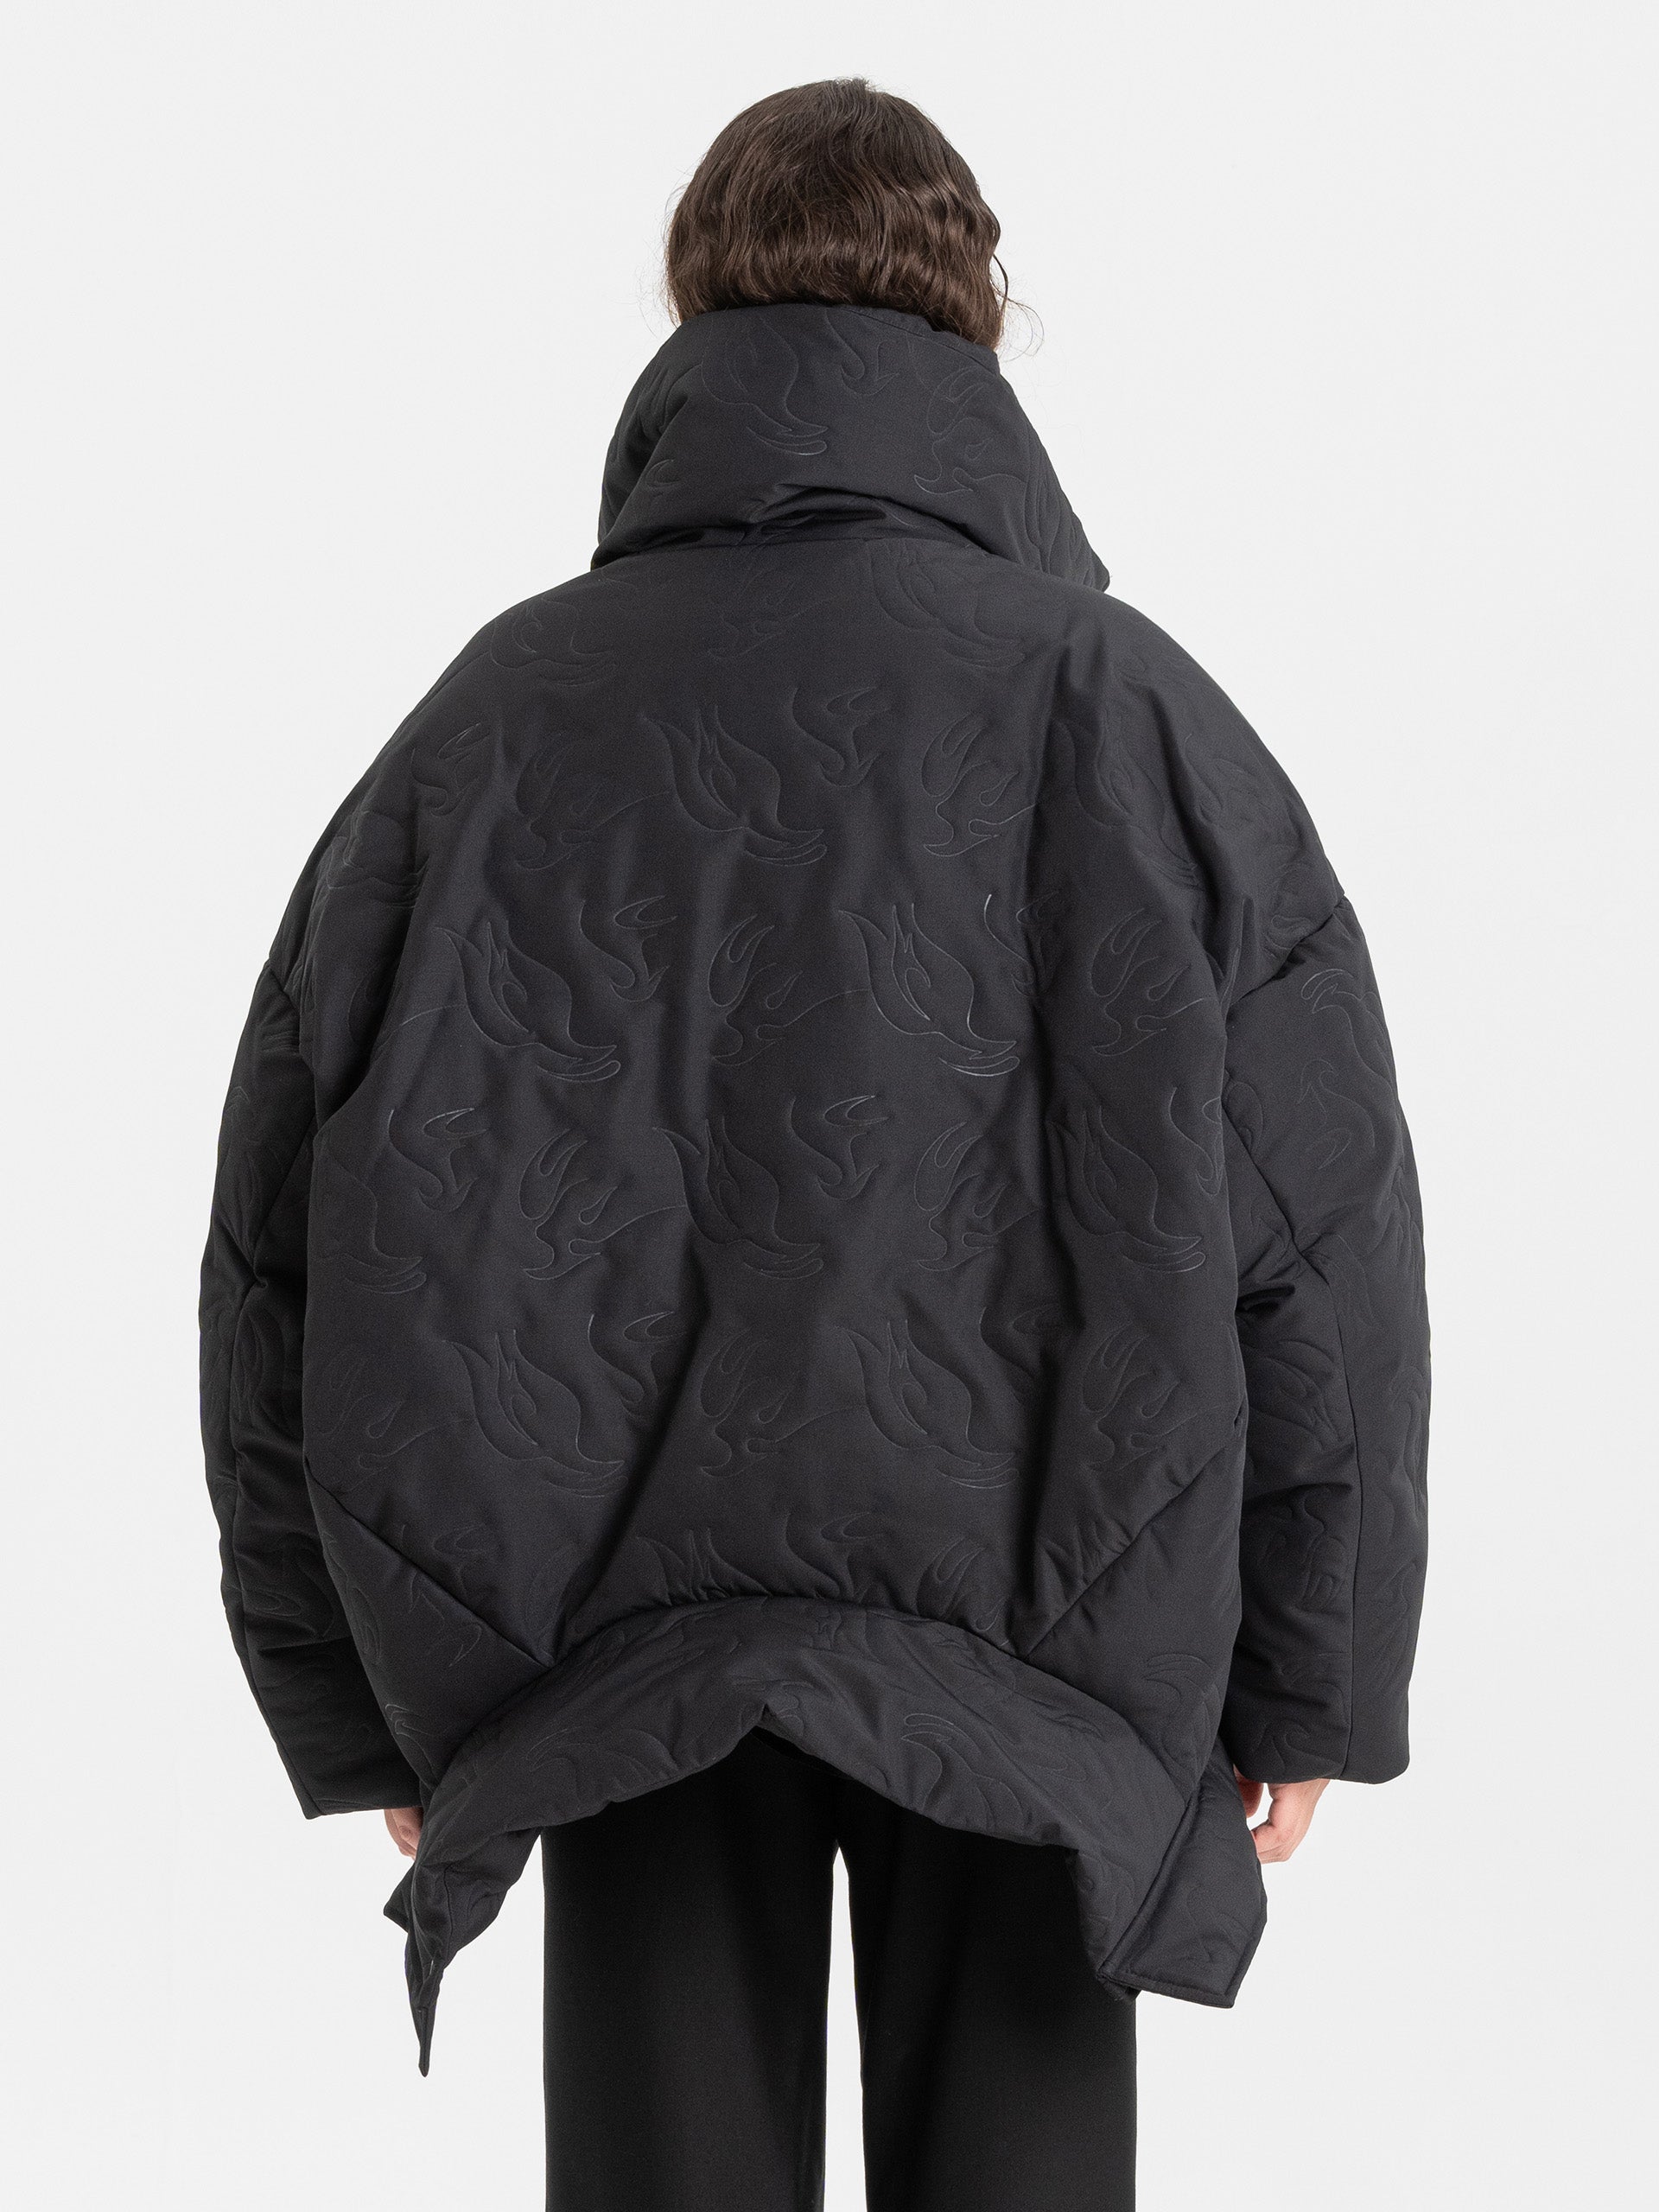 Feng Chen Wang UPSIDE DOWN JACKET IN QUILTED PHOENIX